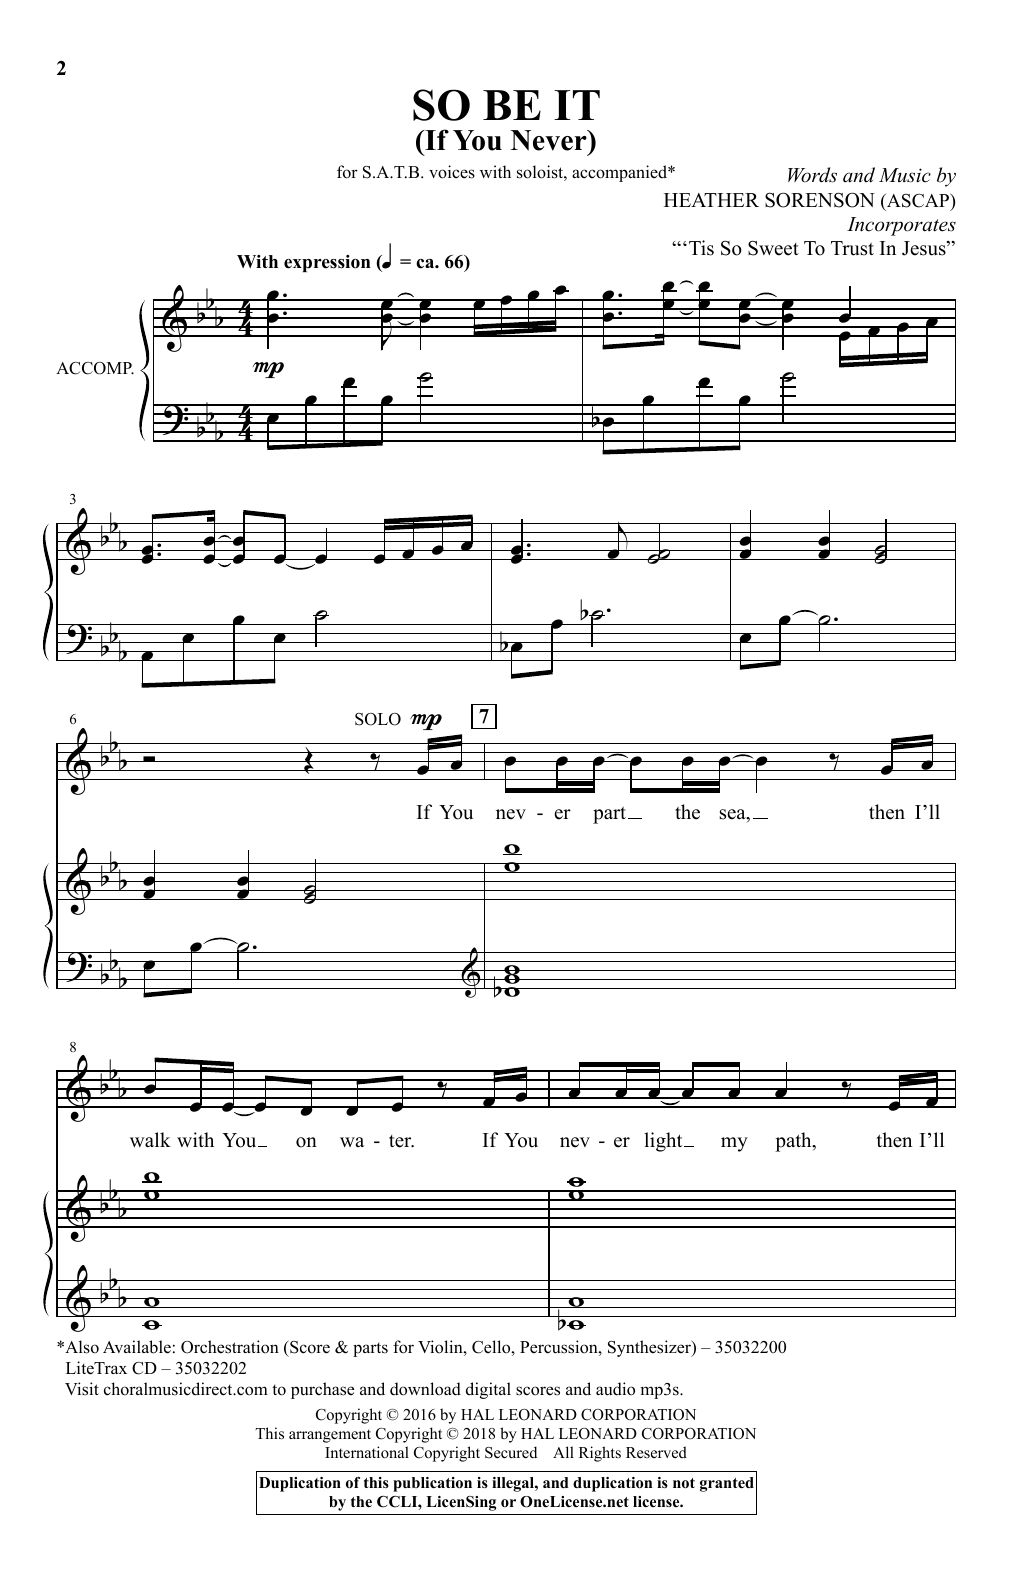 Download Heather Sorenson So Be It (If You Never) Sheet Music